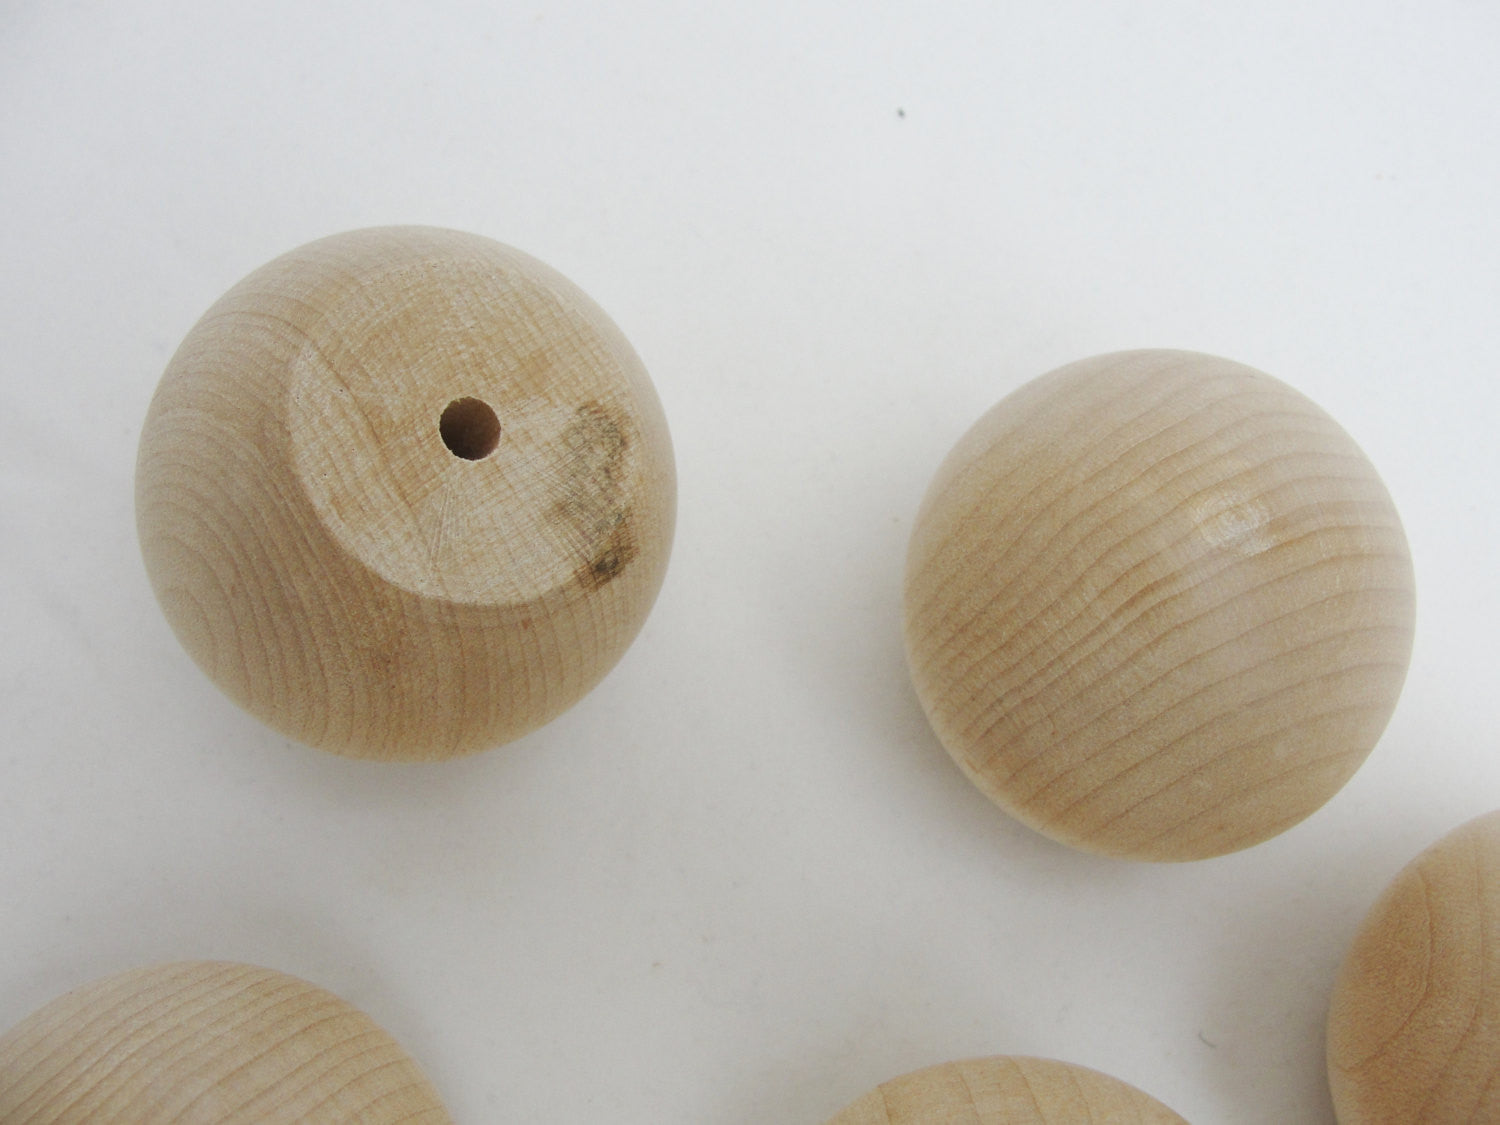 Wooden ball knob 1.75" (1 3/4") solid wood set of 6 - Wood parts - Craft Supply House